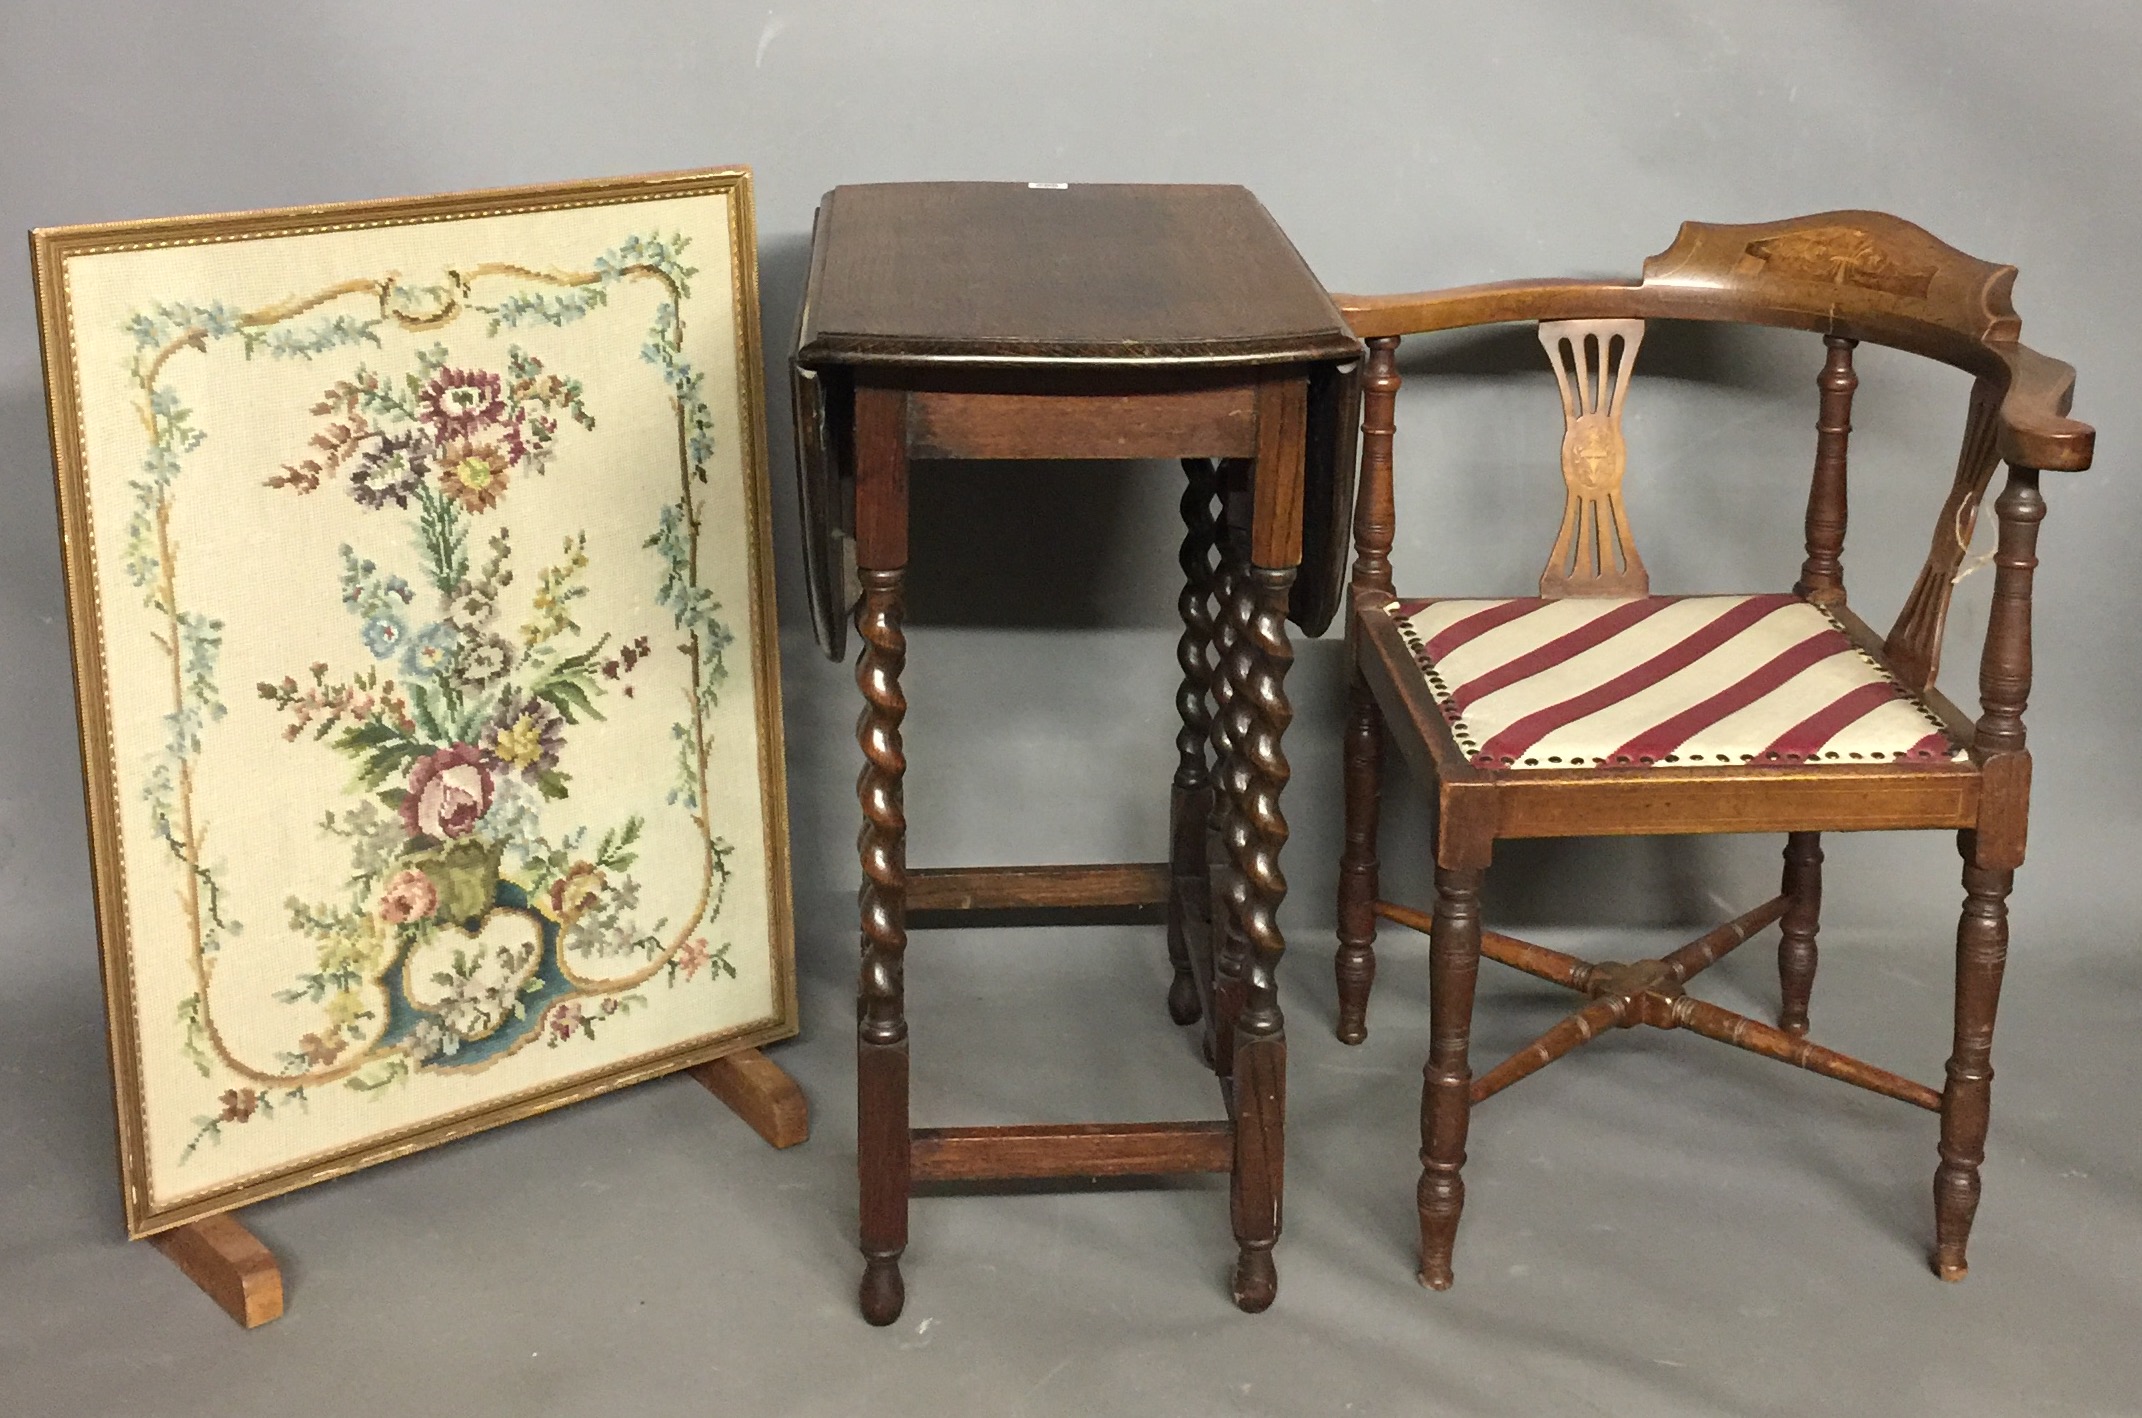 A LATE VICTORIAN MAHOGANY CORNER CHAIR Along with an early 20th Century oak gate leg table with